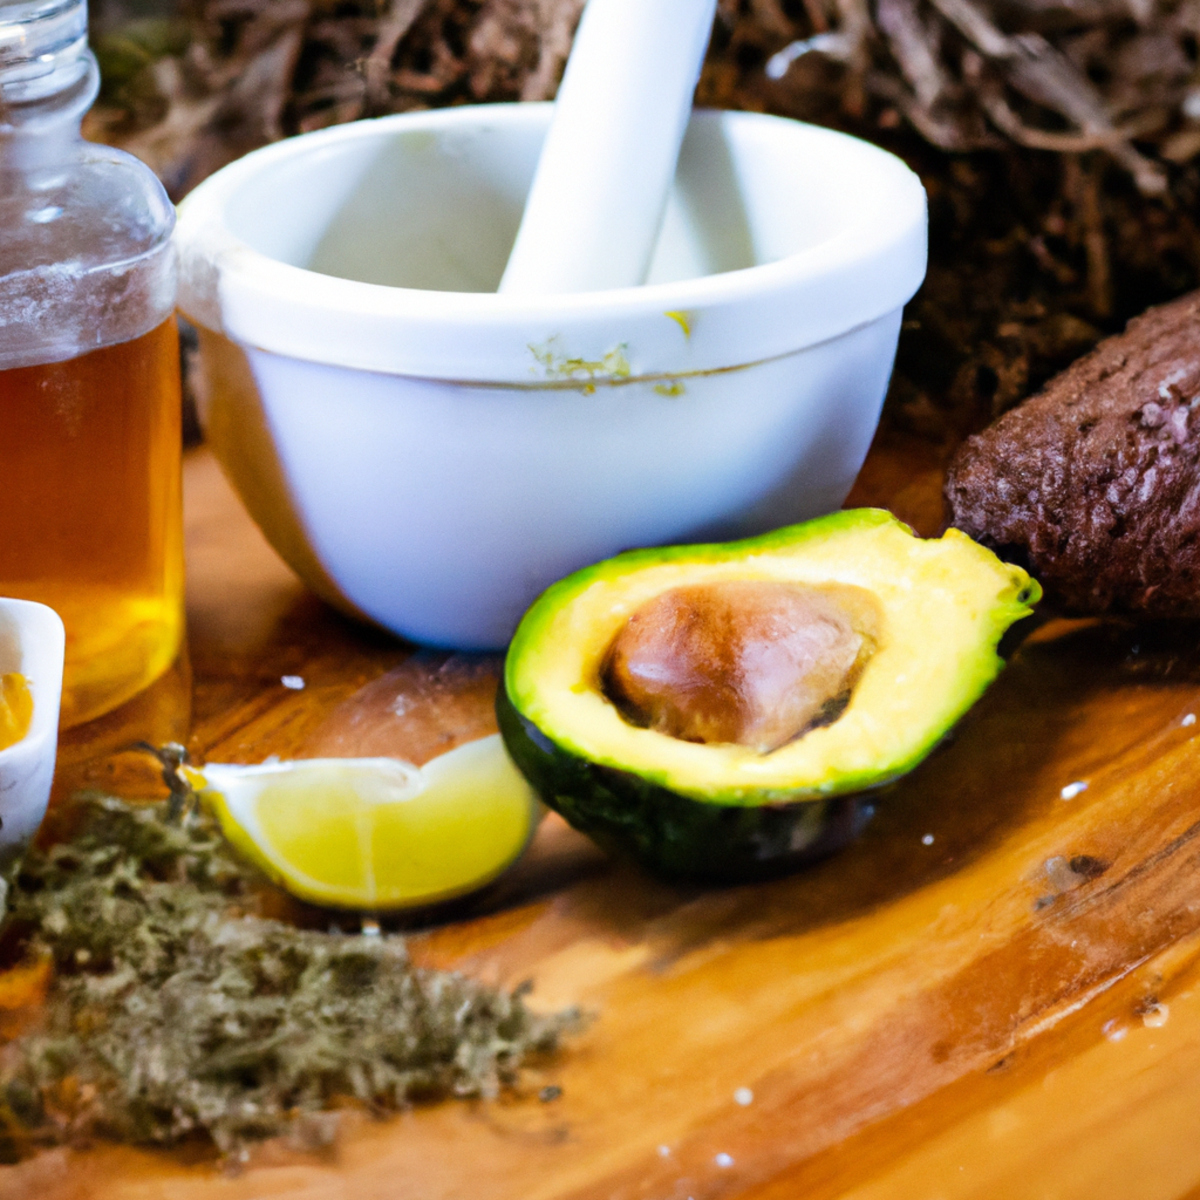 Whip up a batch of beauty with these natural skin care routines! From avocado to honey, these DIY face mask ingredients will have you glowing in no time.